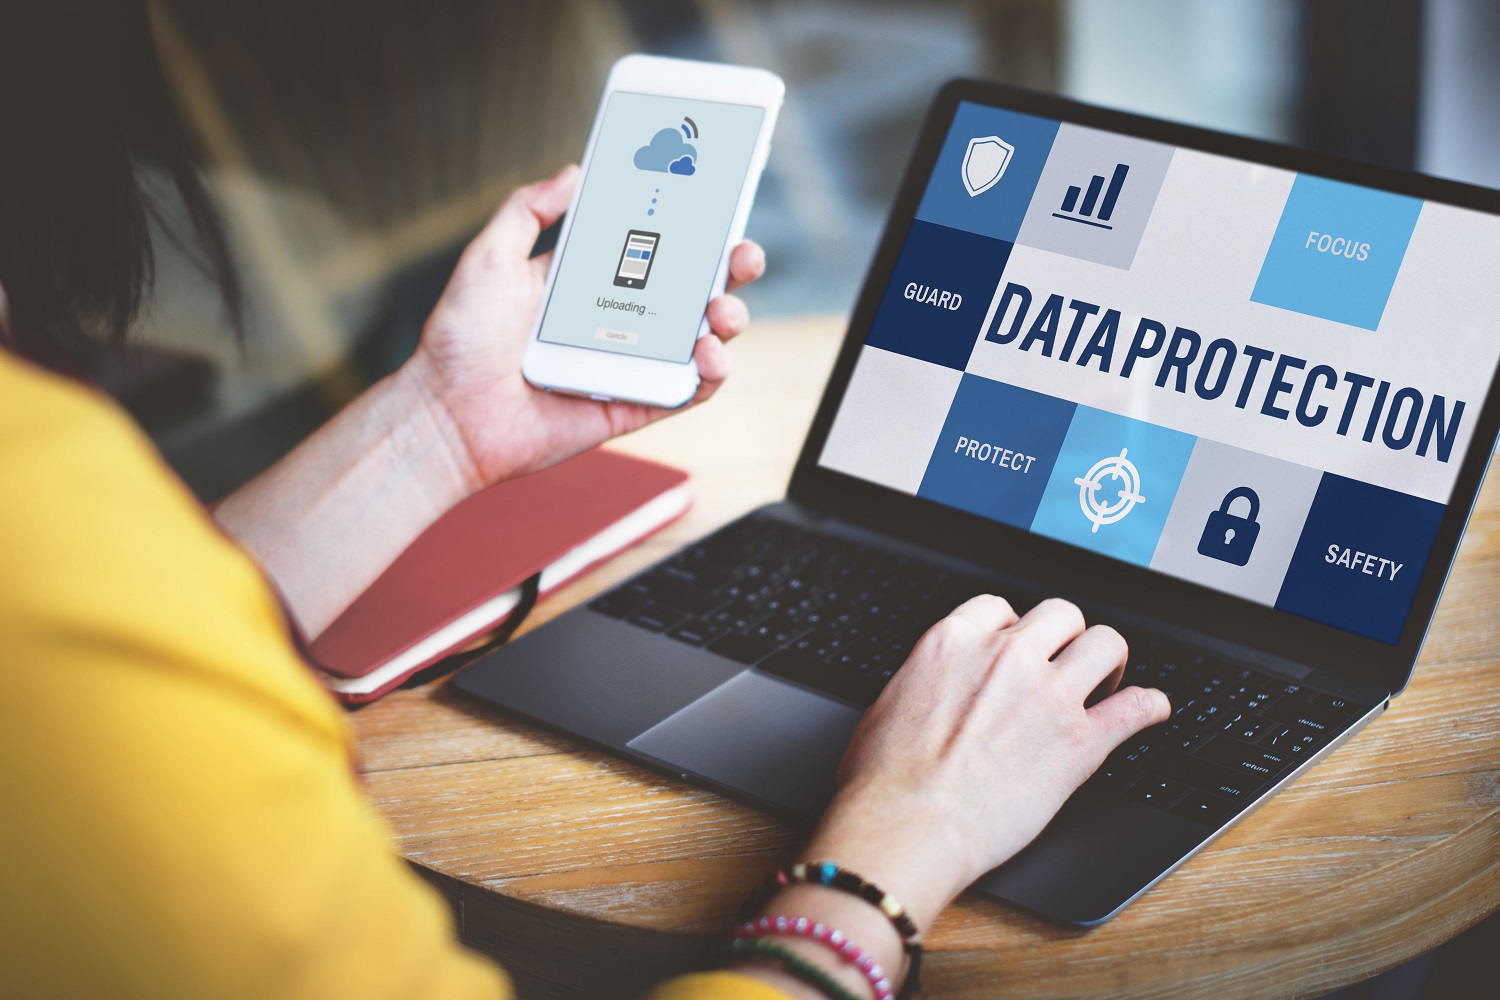 What can be done to protect data